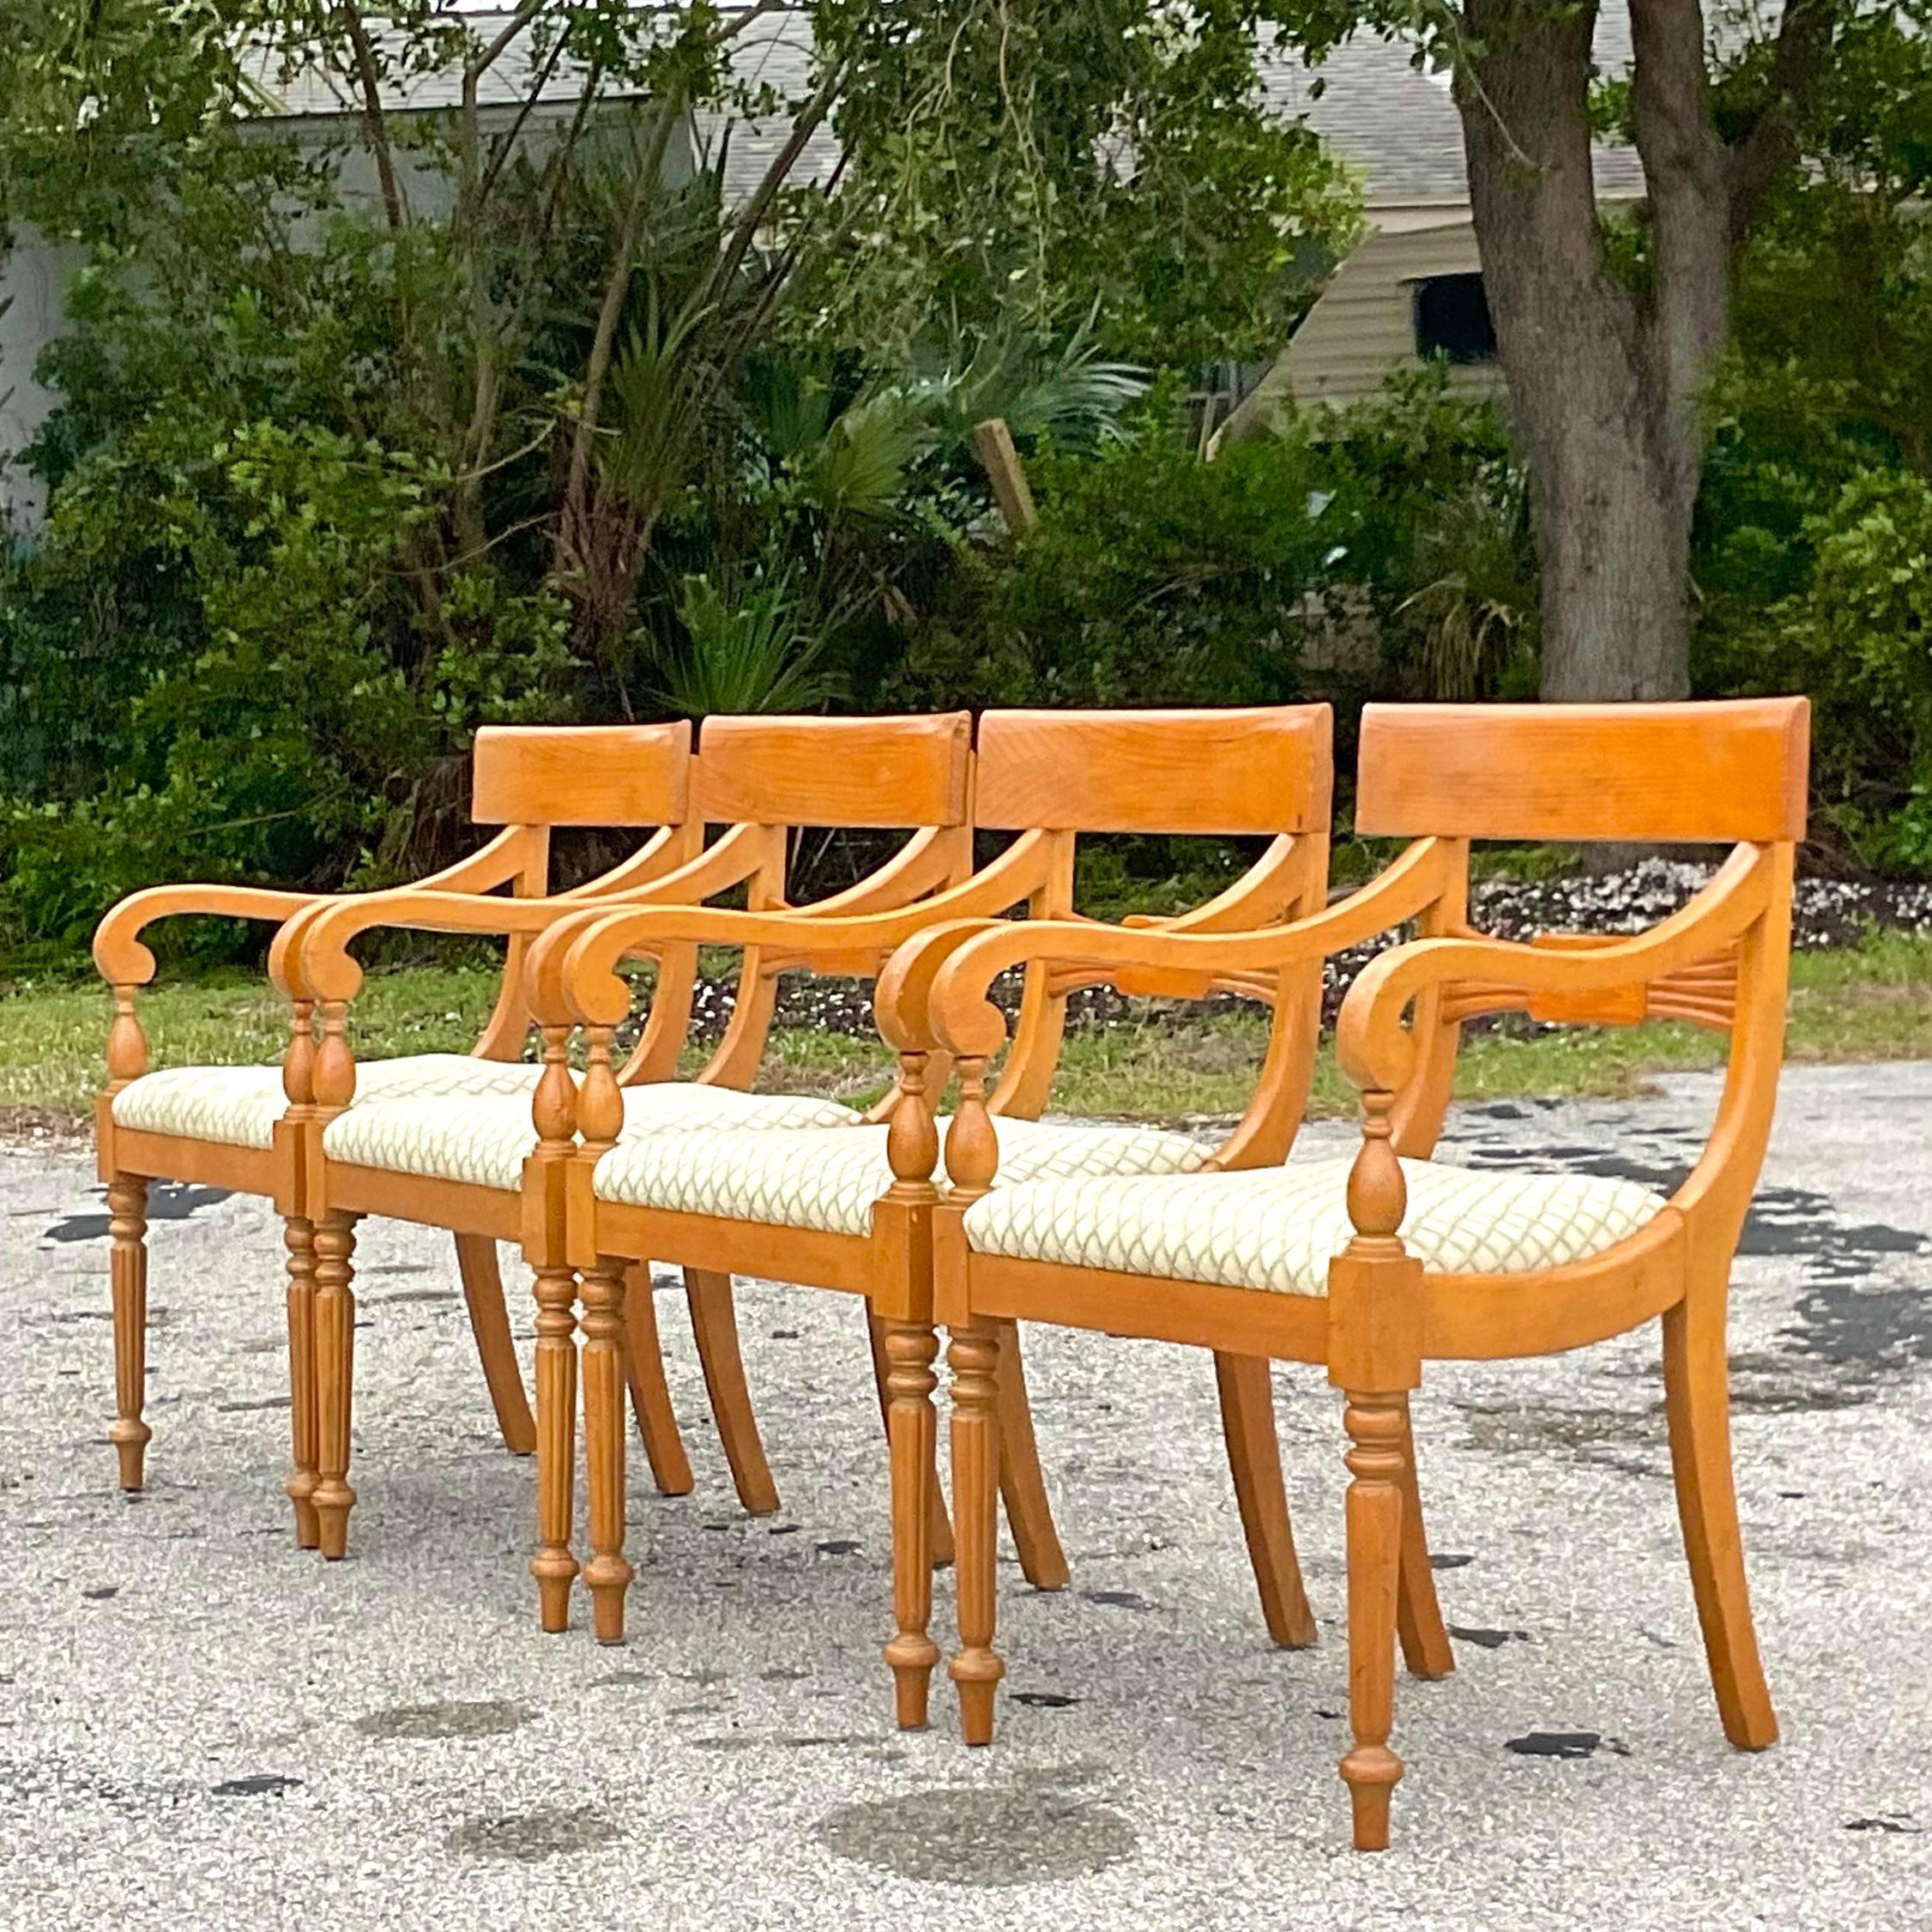 A fabulous set of four vintage Boho dining chairs. Made by the iconic Milling Road group for Baker Furniture. Tagged below the chair. A chic Klismos style in a warm finish. Acquired from a Palm Beach estate. 